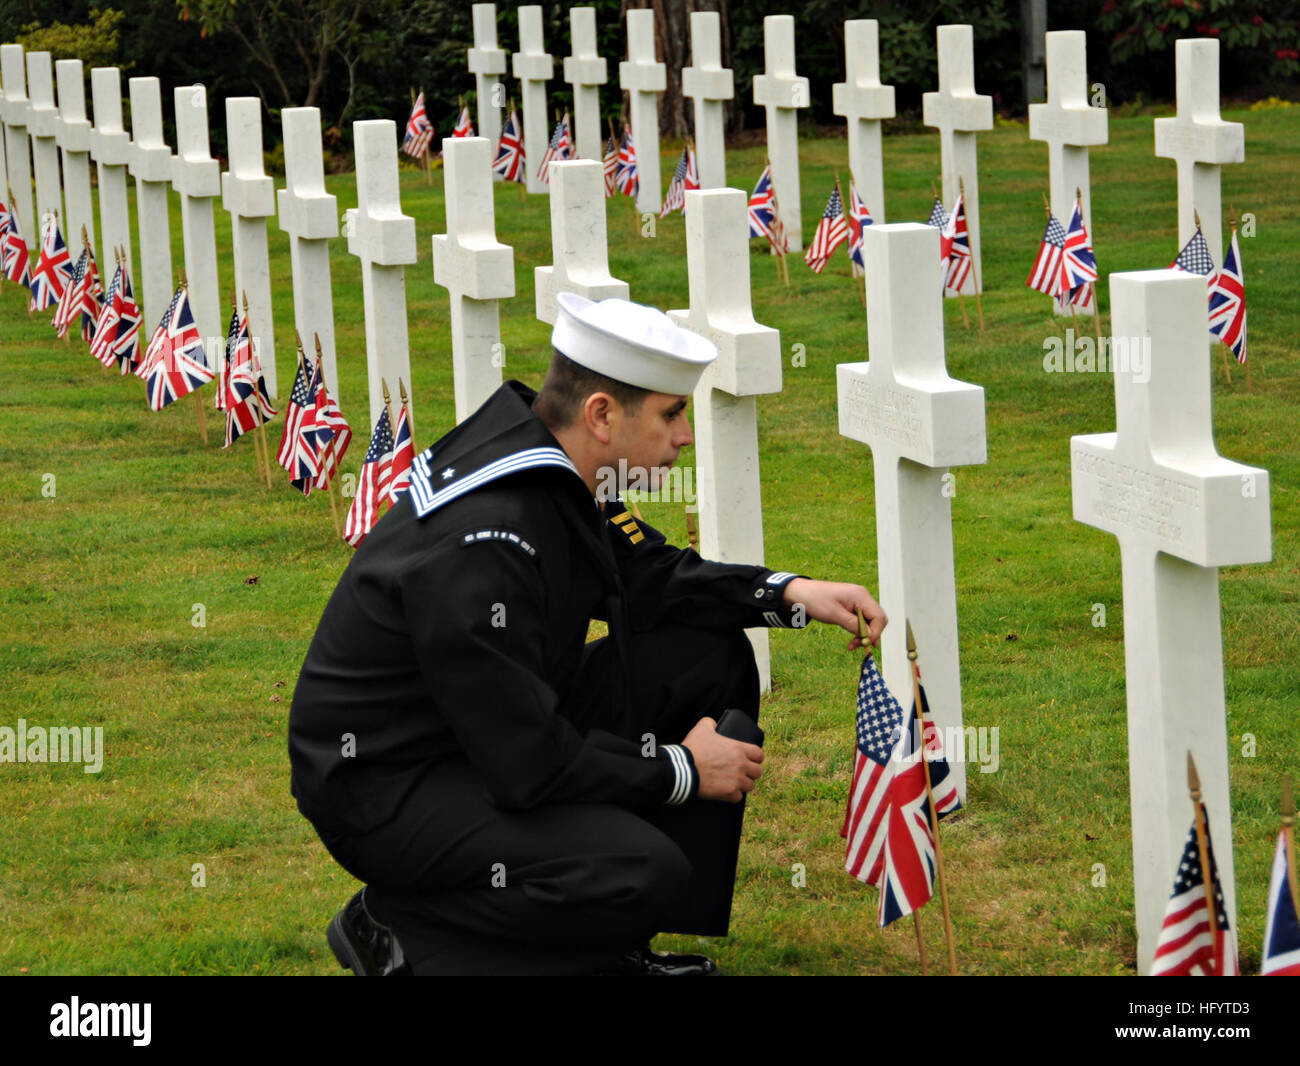 110529-N-PE140-126 BROOKWOOD, England (May 29, 2011) Ship's Serviceman 1st Class Samuel Hernandez-Moreno, assigned to the aircraft carrier USS George H.W. Bush (CVN 77), pays his respects to a fallen service member buried at the Brookwood American Cemetery and Memorial on Memorial Day. George H.W. Bush is anchored off the coast of Portsmouth, England, for the ship's first overseas port visit of its first combat deployment. (U.S. Navy photo by Mass Communication Specialist 2nd Class Jennifer L. Jaqua/Released) US Navy 110529-N-PE140-126 Ship's Serviceman 1st Class Samuel Hernandez-Moreno pays h Stock Photo